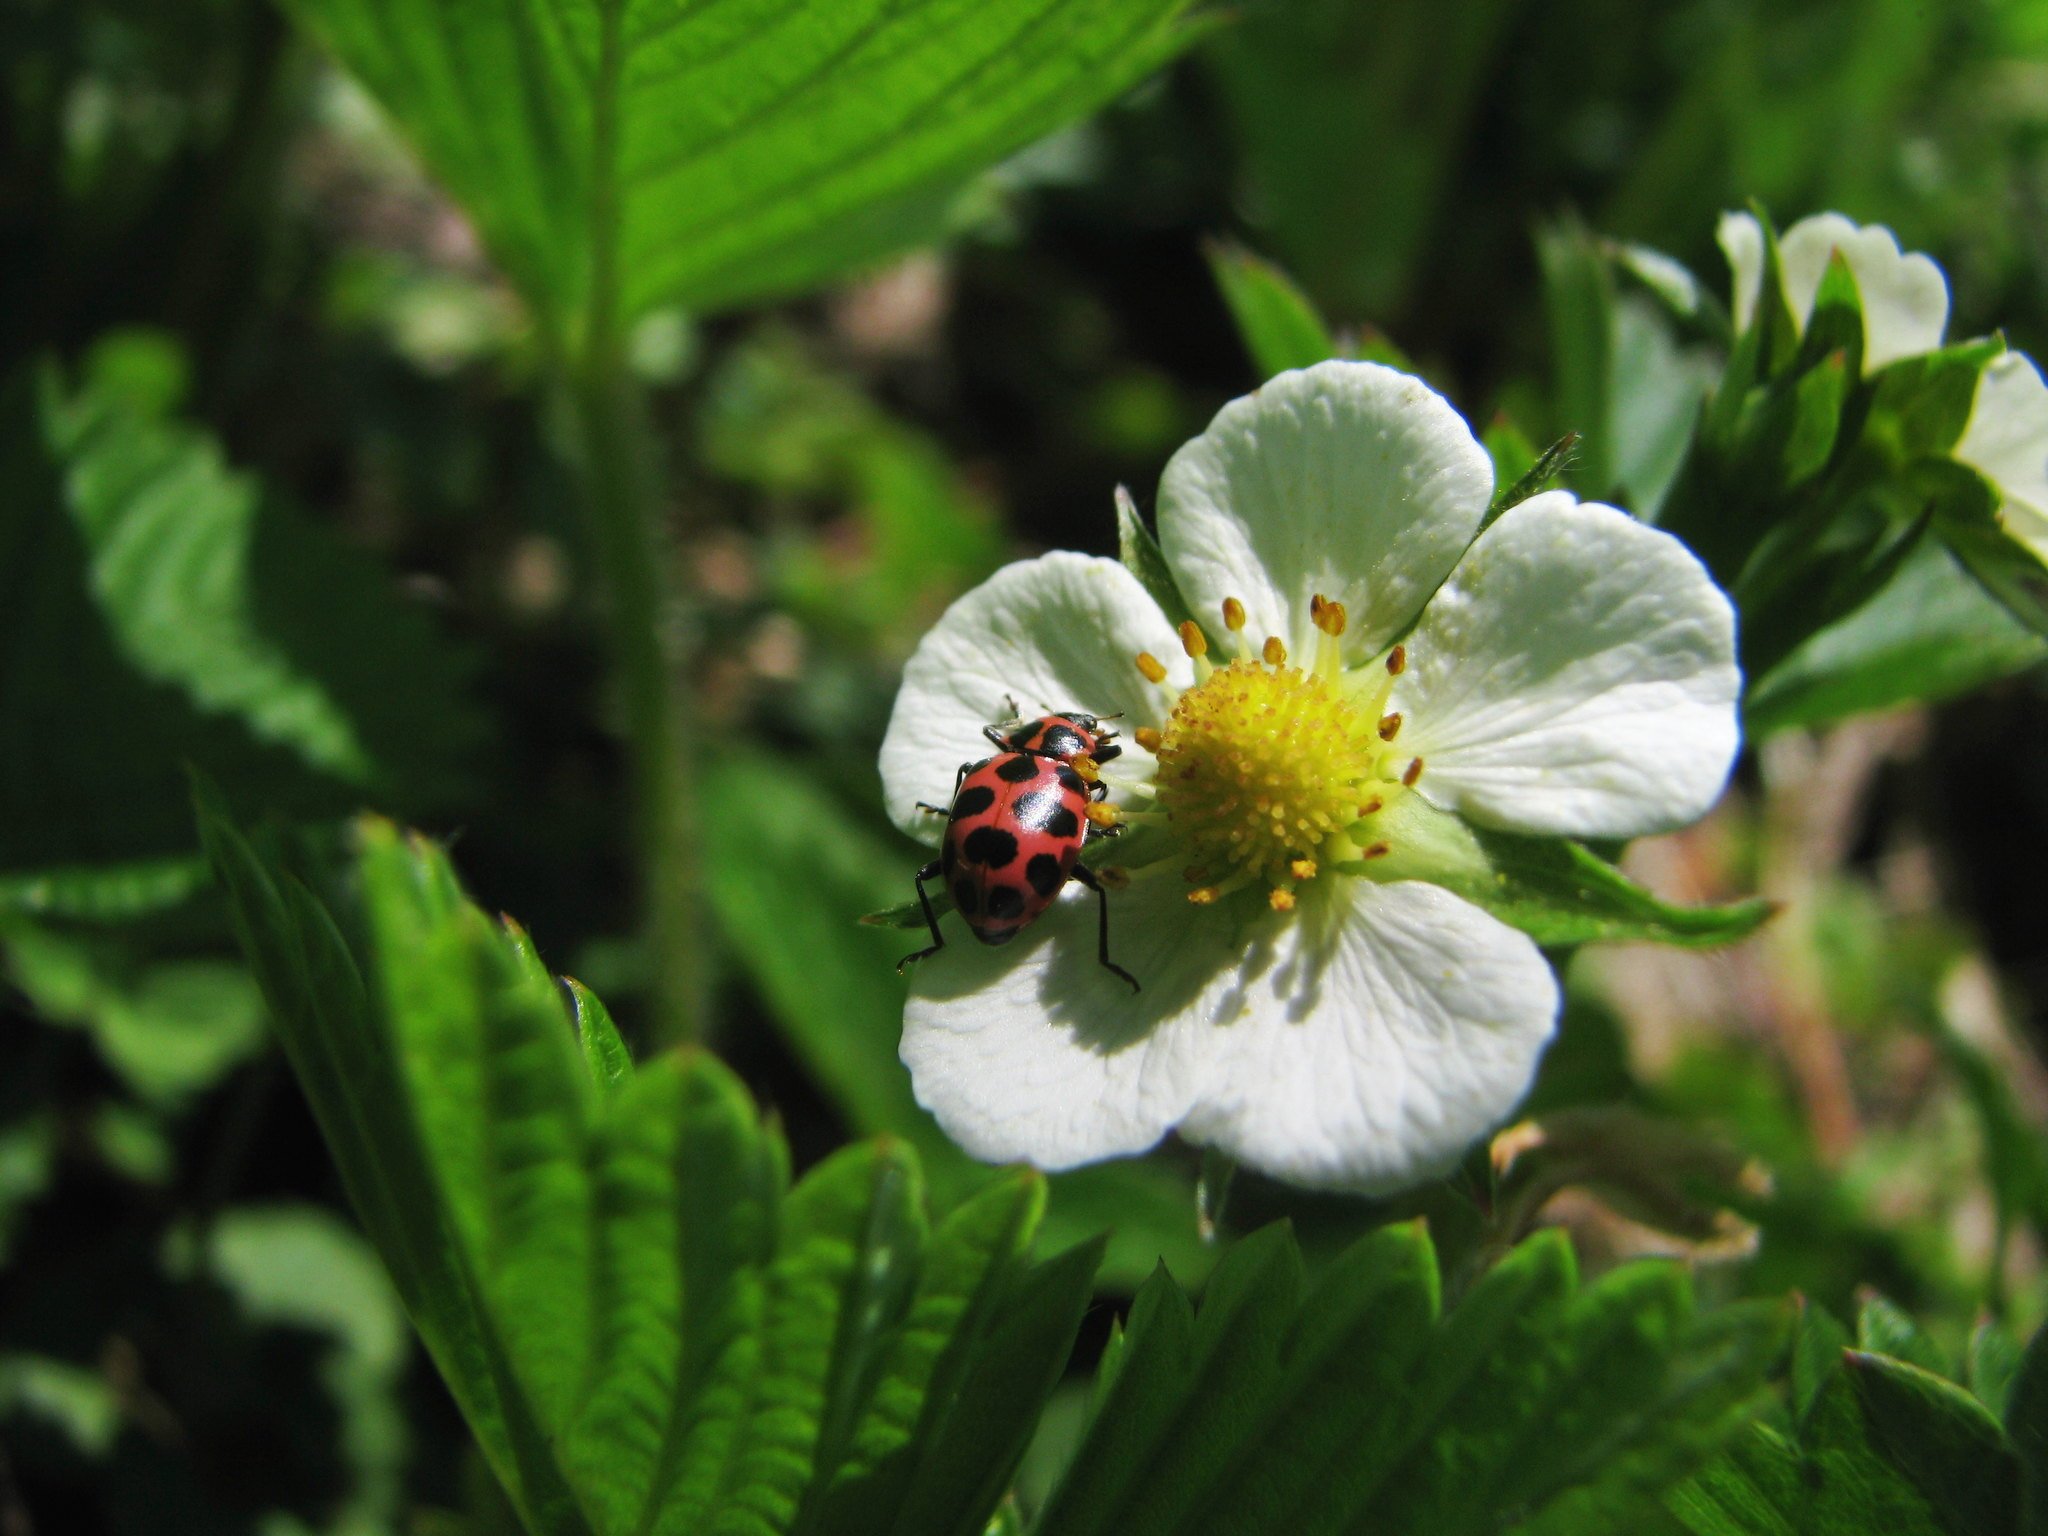 Wood Strawberry is a wildflower found in redwood forests. Photo by Laurel Russwurm